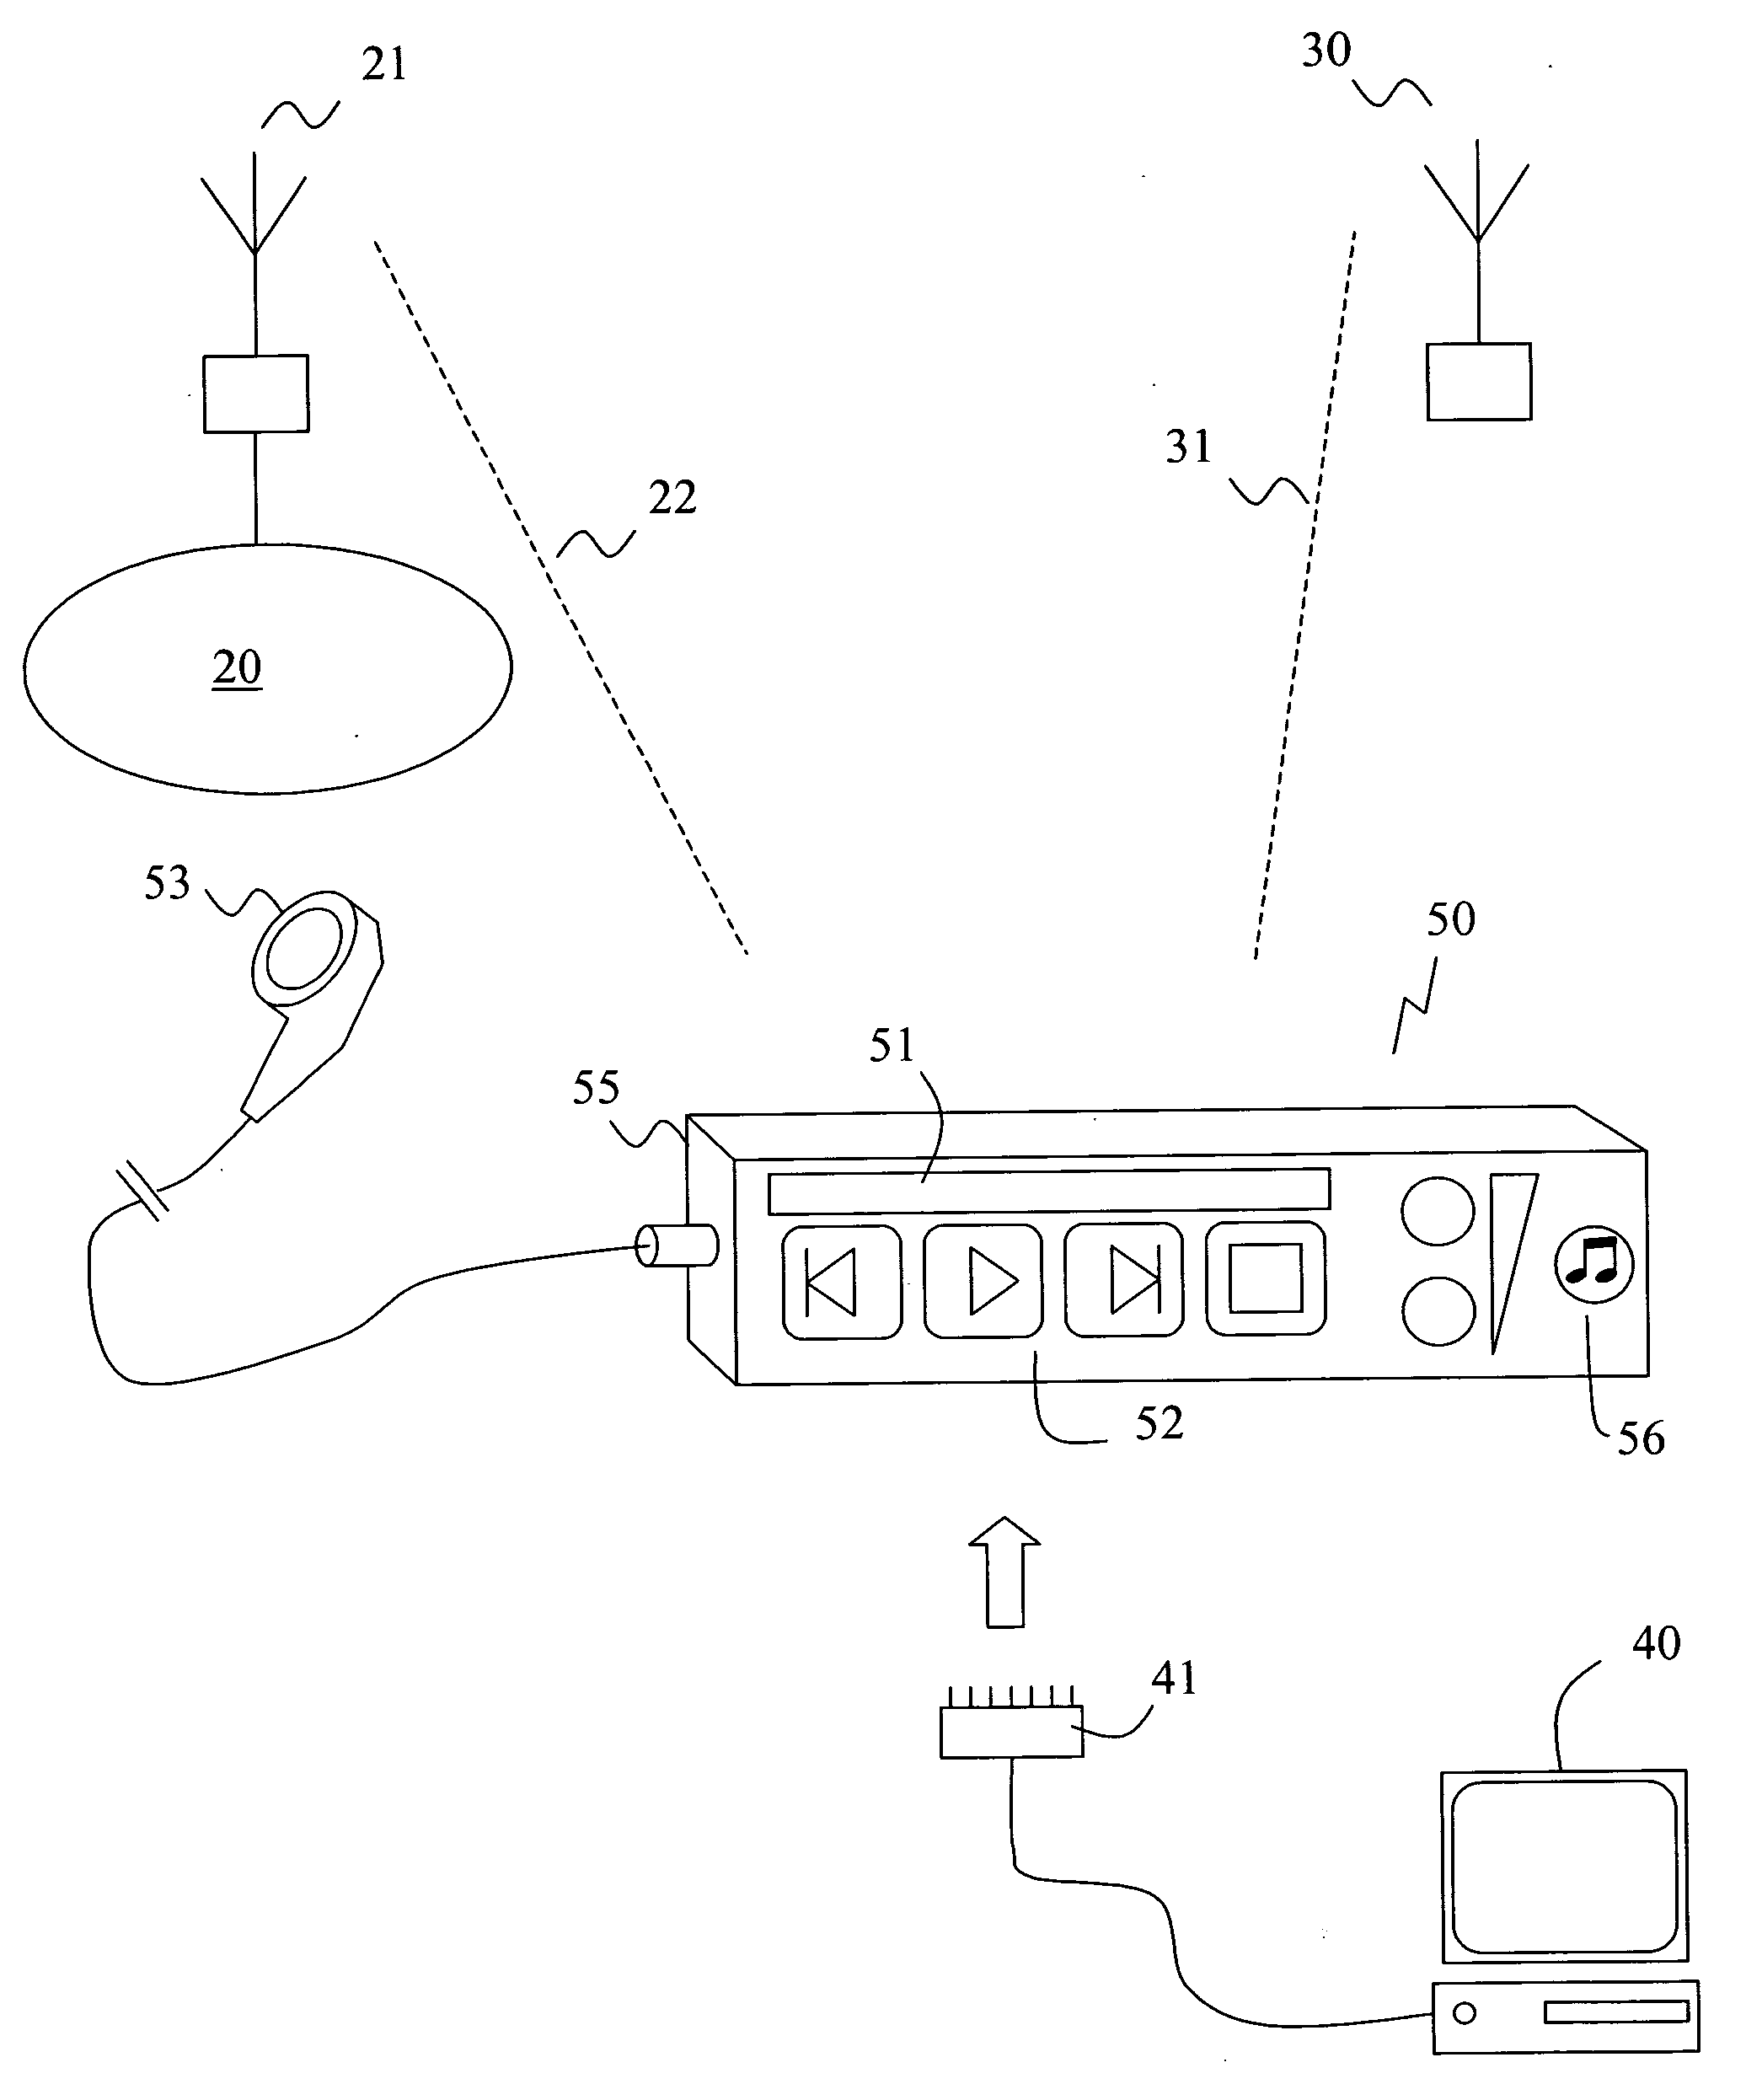 User interface for an electronic device